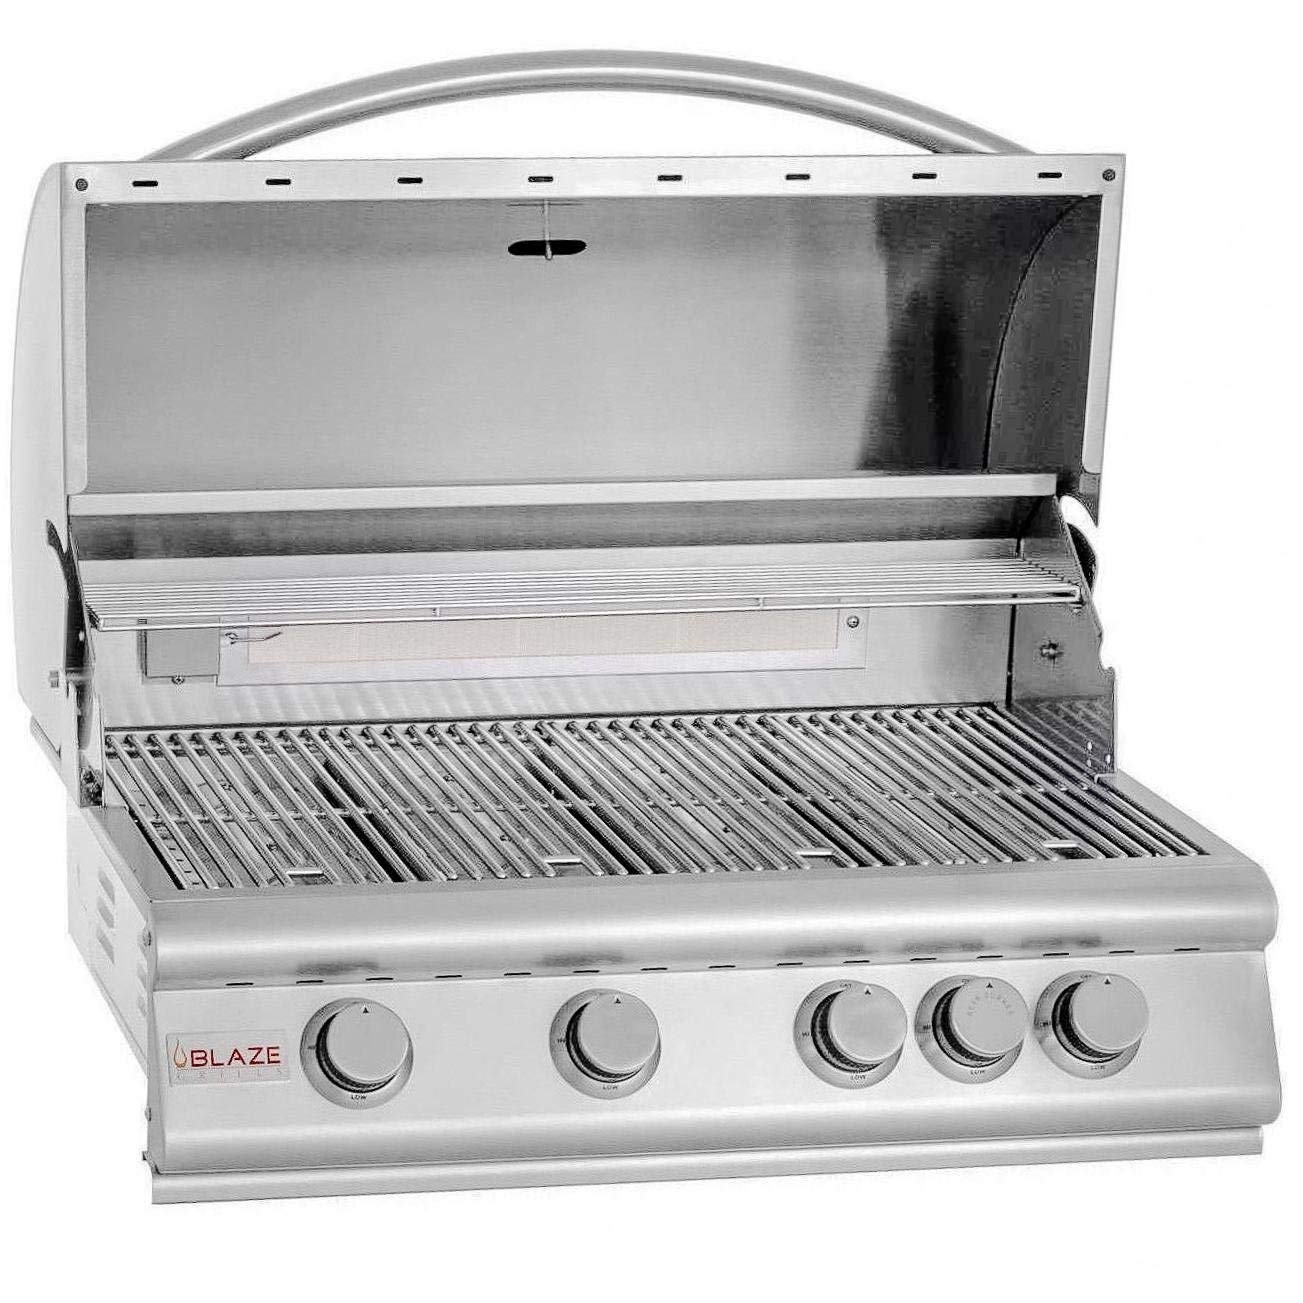 Barbecue Grill Brands - Buy Electric, Charcoal and Propane Grills At Best Prices